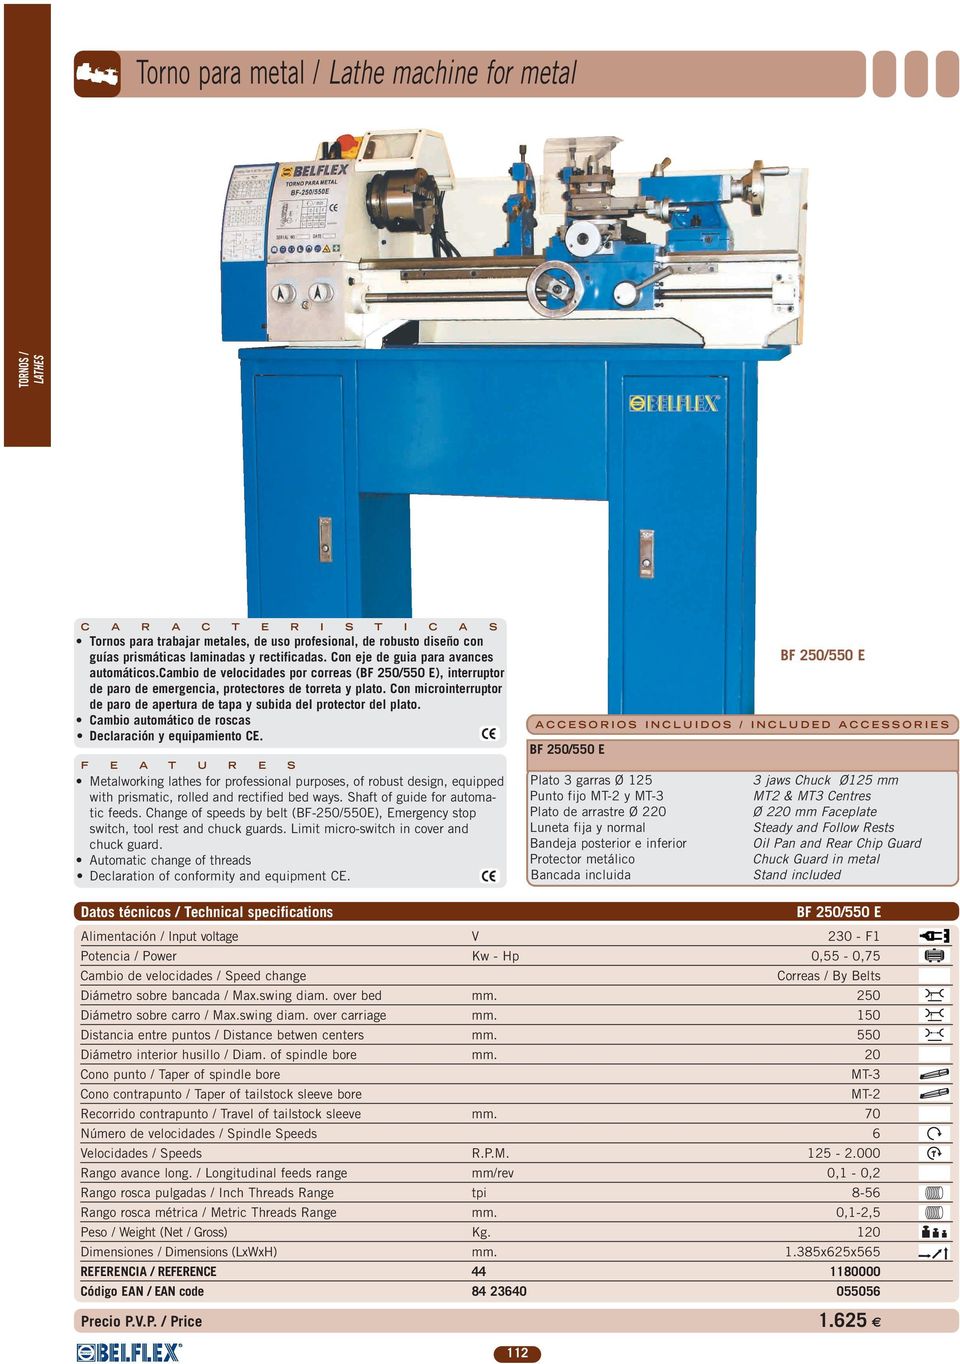 Cambio automático de roscas Metalworking lathes for professional purposes, of robust design, equipped with prismatic, rolled and rectified bed ways. Shaft of guide for automatic feeds.